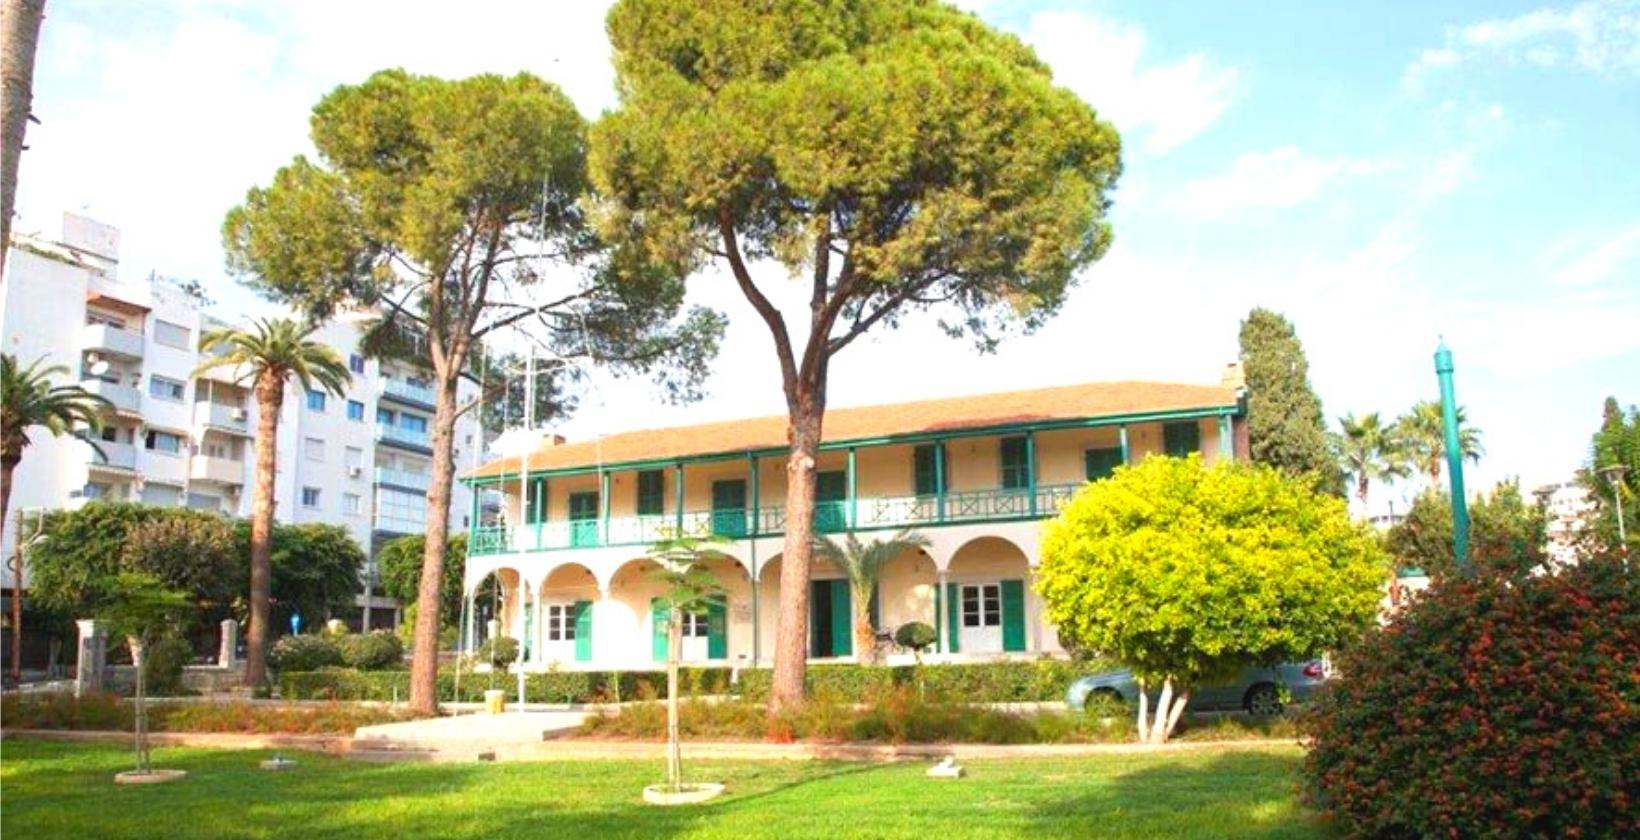 Historical Archive Museum of Limassol